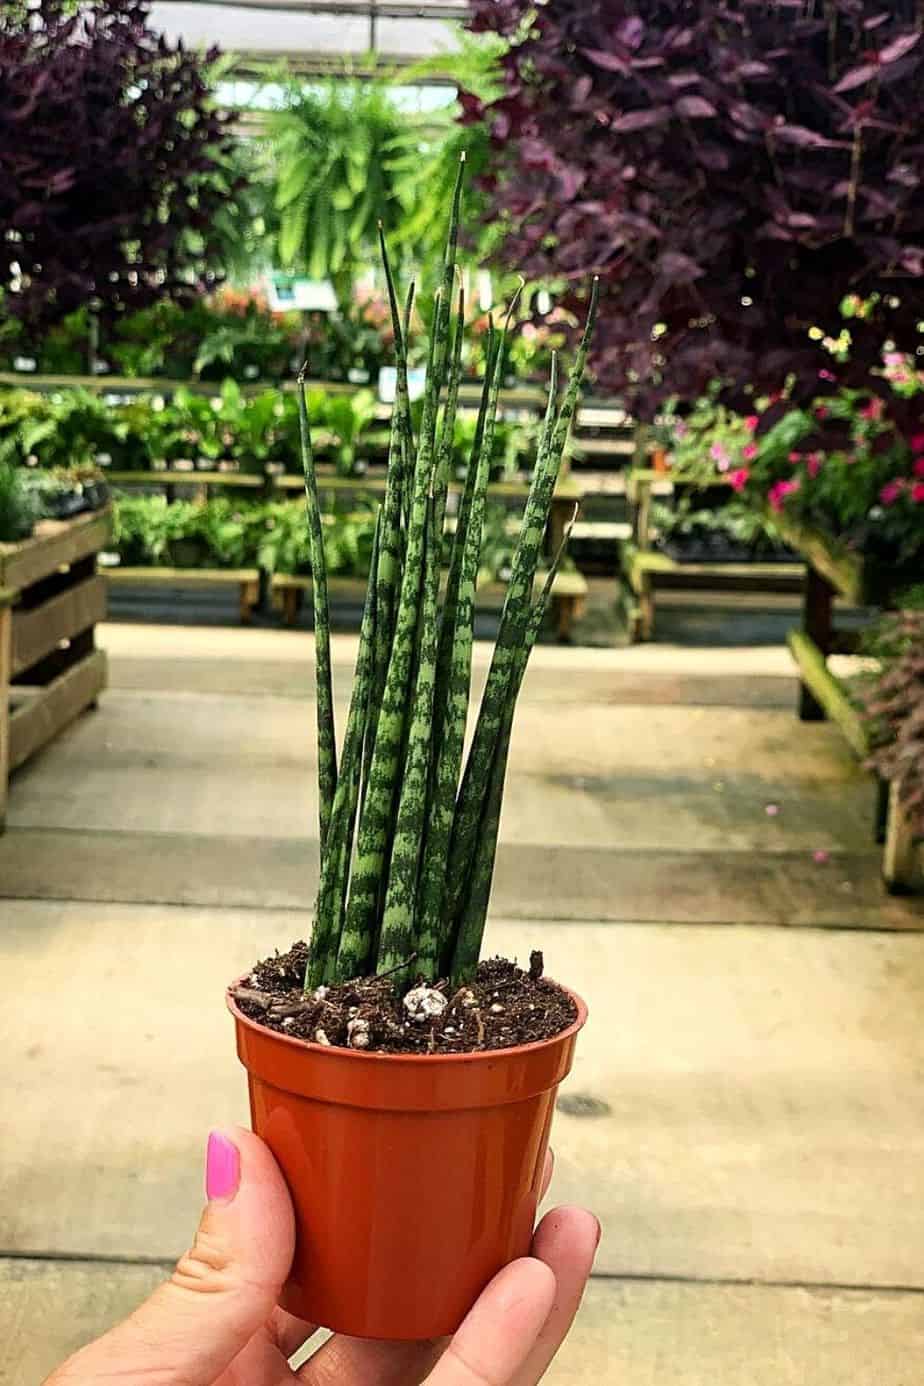 Sansevieria Fernwood Mikado is a result of the combination of Sansevieria Suffruticosa and Sansevieria Parva, which is great for northwest-facing windows